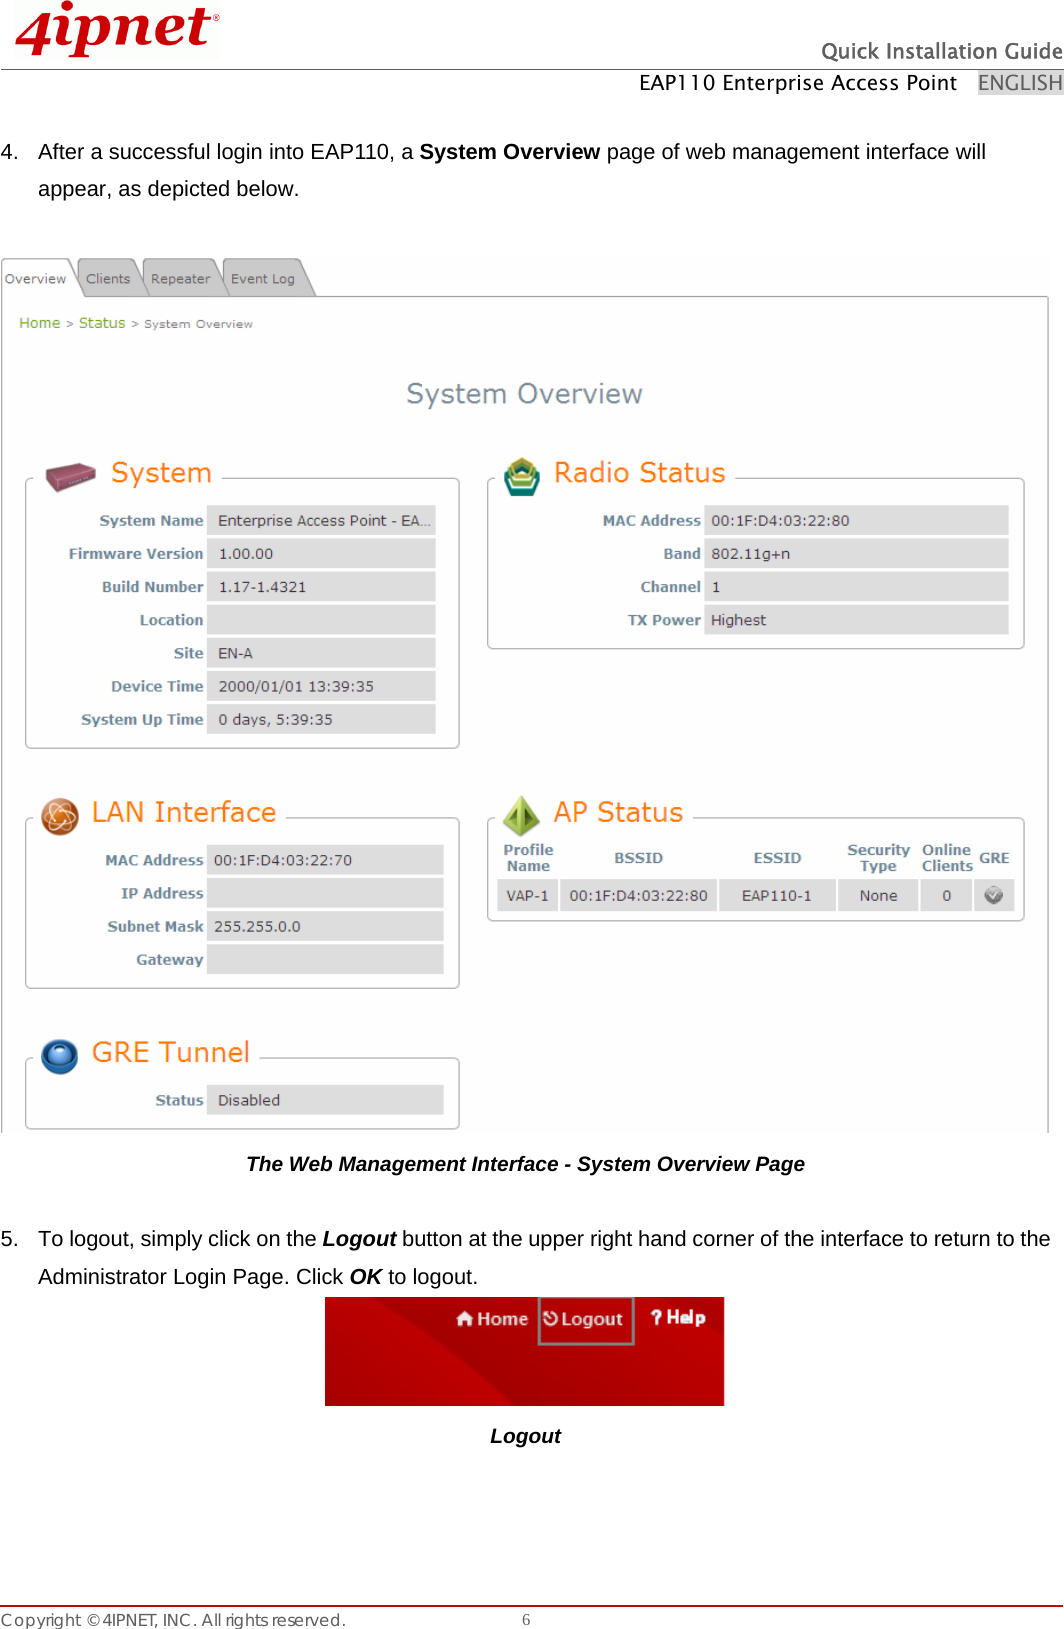  Quick Installation Guide EAP110 Enterprise Access Point    ENGLISH Copyright © 4IPNET, INC. All rights reserved.    6 4.  After a successful login into EAP110, a System Overview page of web management interface will appear, as depicted below.   The Web Management Interface - System Overview Page  5.  To logout, simply click on the Logout button at the upper right hand corner of the interface to return to the Administrator Login Page. Click OK to logout.  Logout    